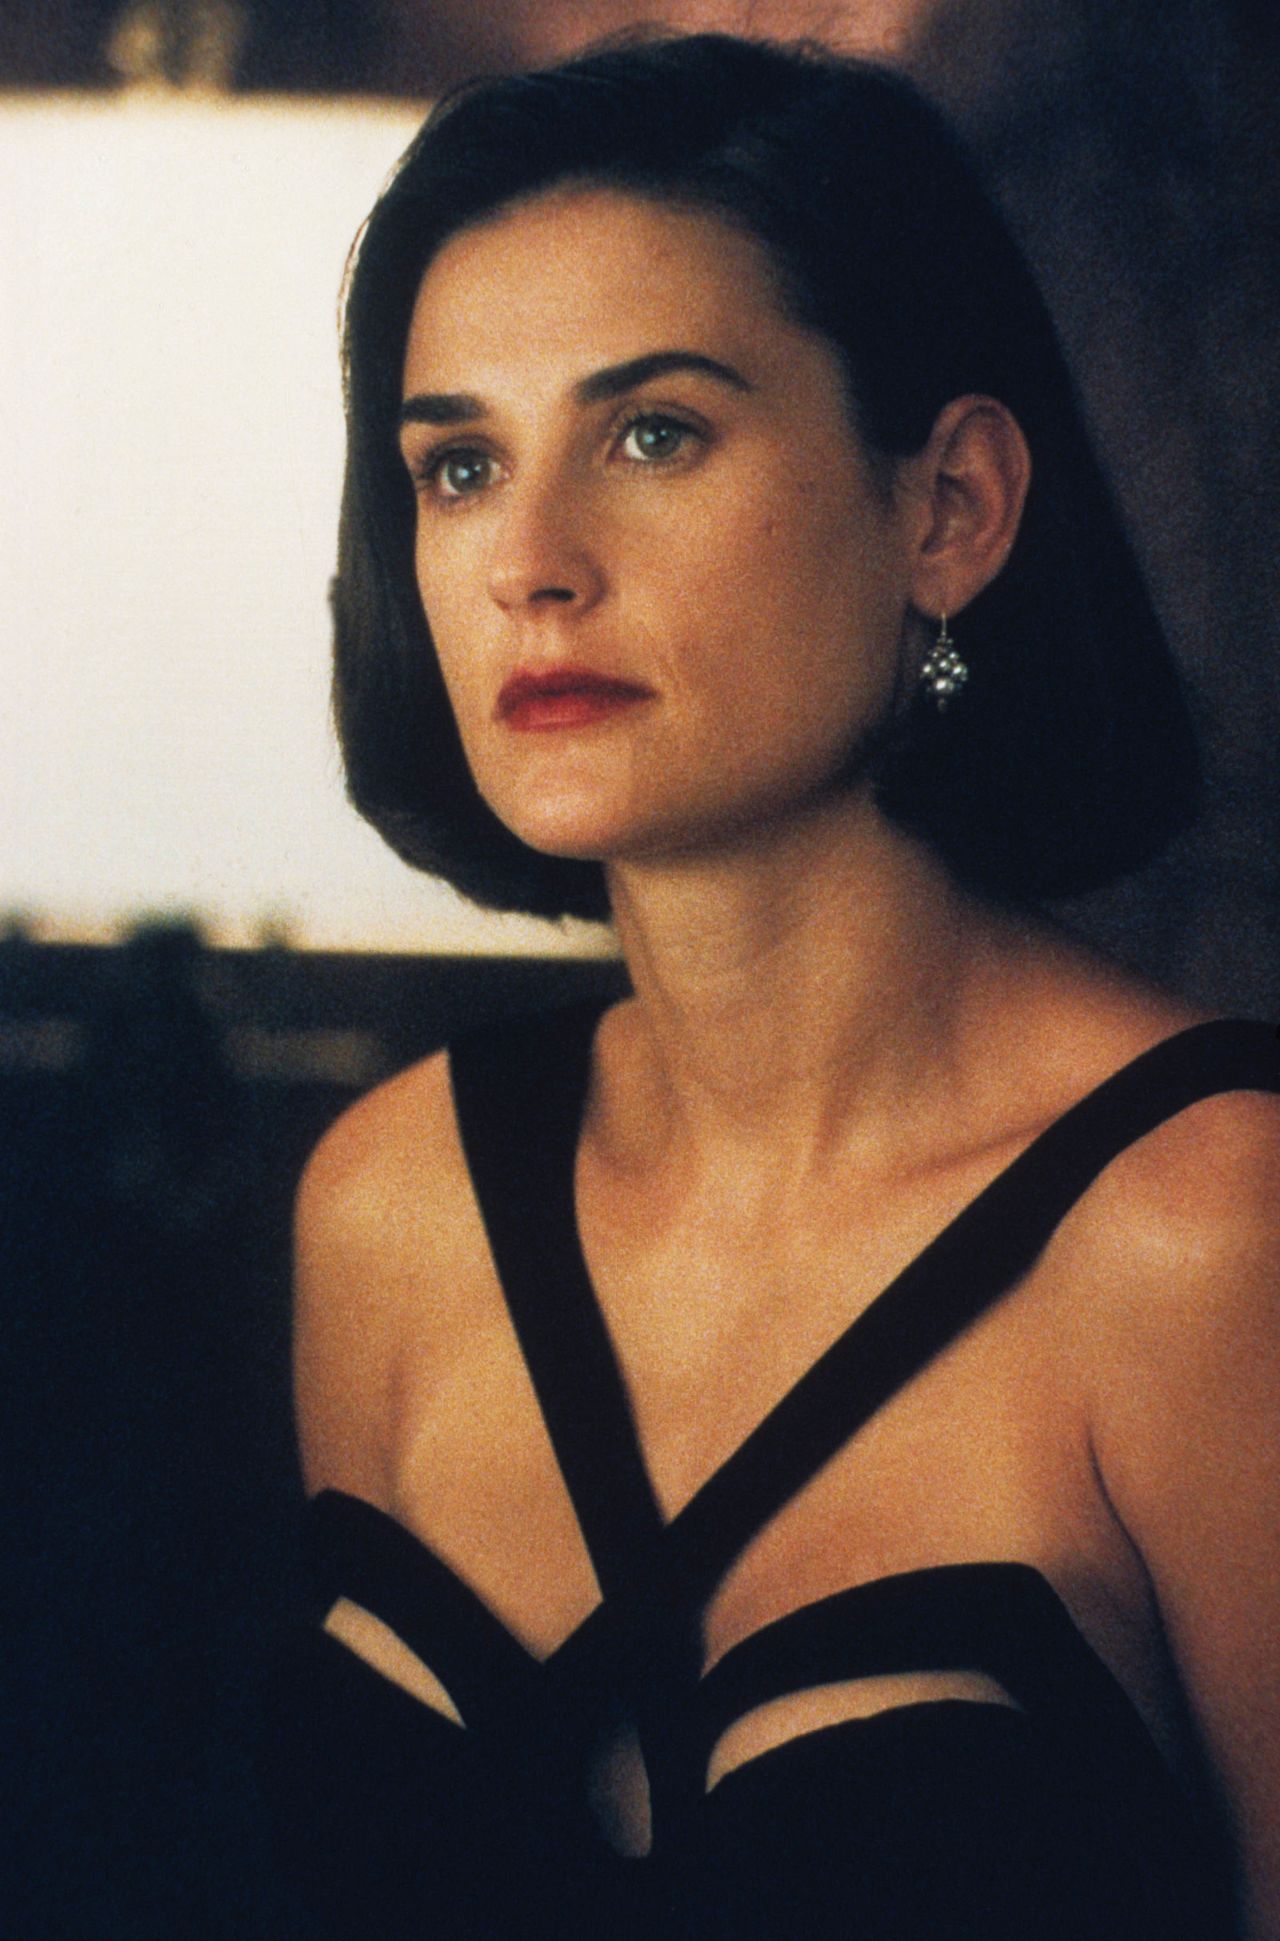 The black gown that Mugler designed for Demi Moore, for the 1993 movie "Indecent Proposal," became one of the decade's most iconic dresses.